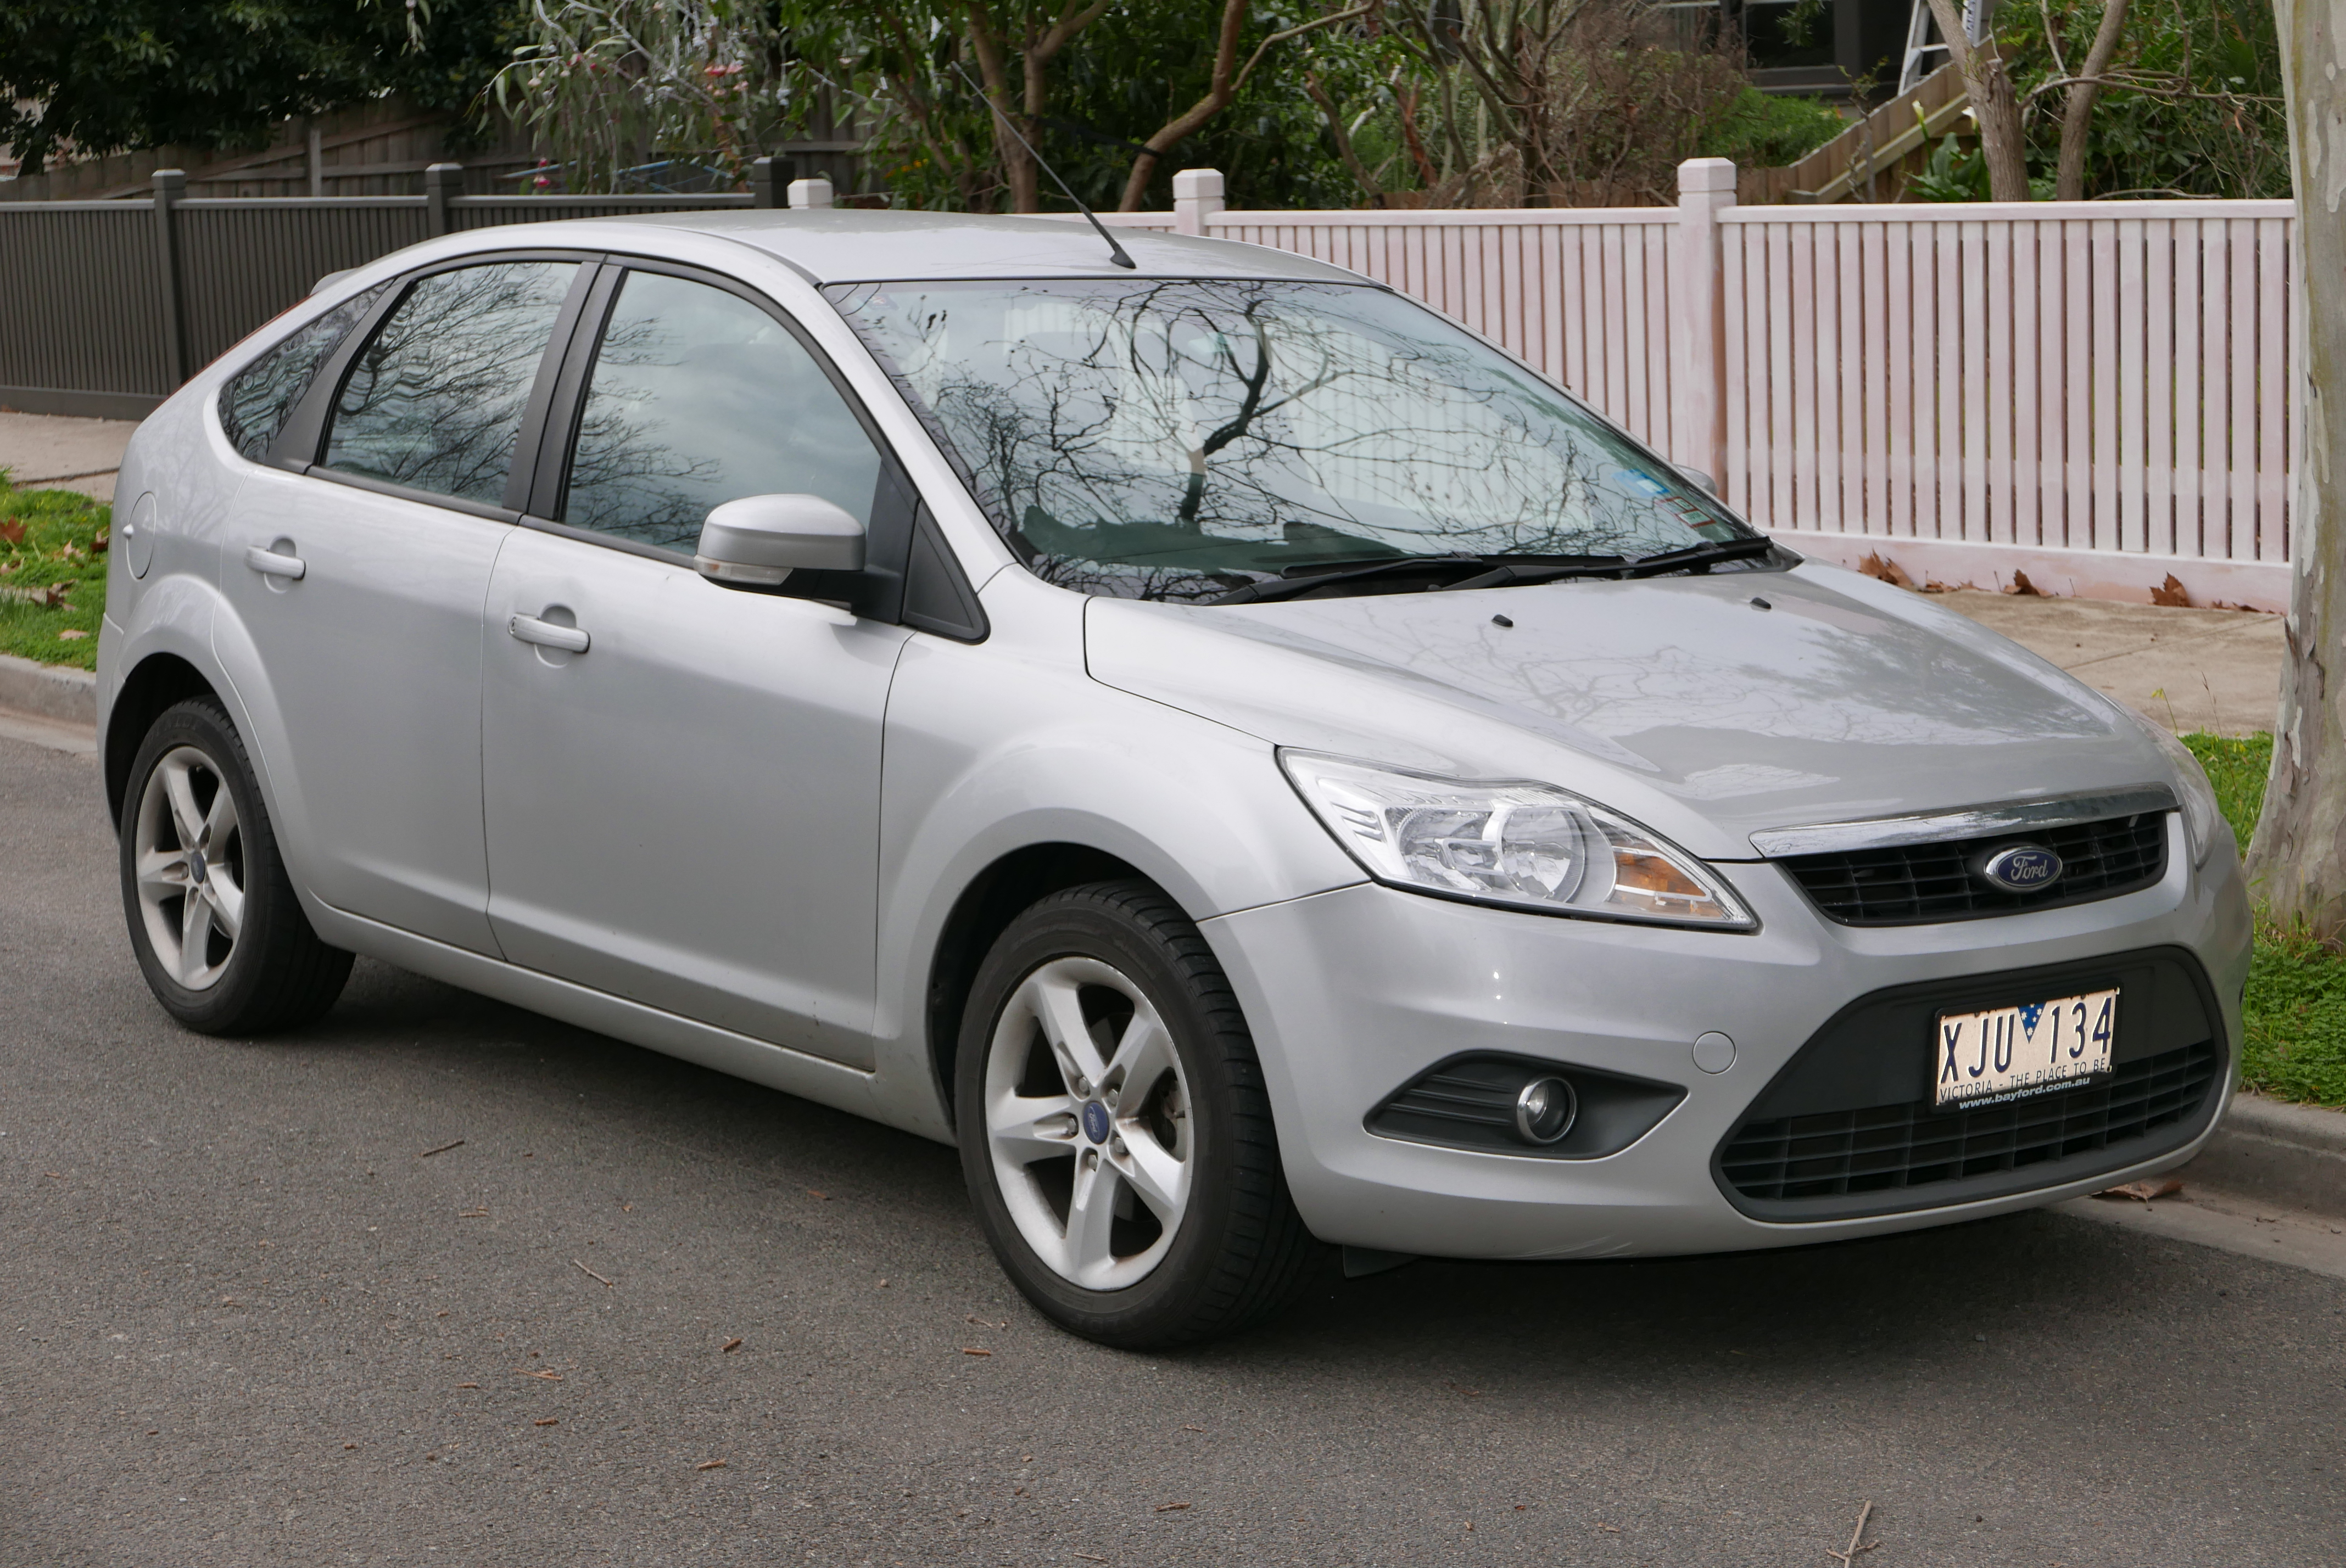 Ford Focus Wagon Active exterior restyling